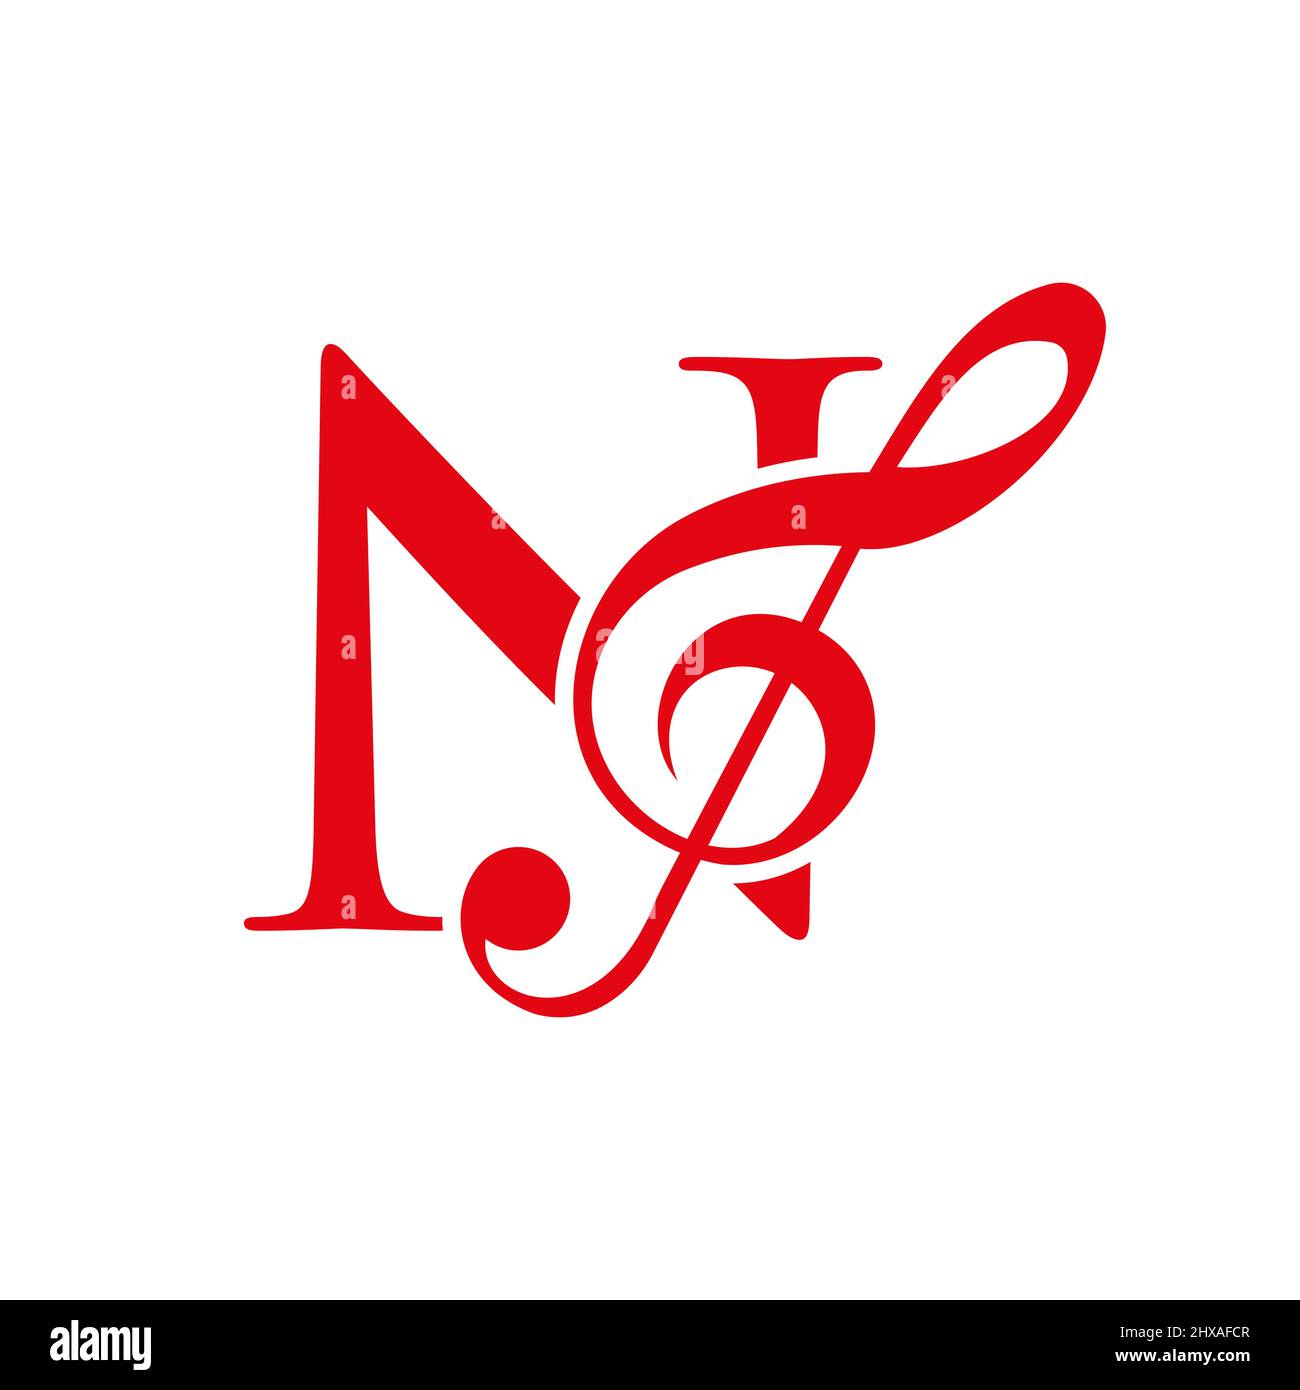 Music Logo On Letter N Concept. N Music Note Sign, Sound Music Melody Template Stock Vector